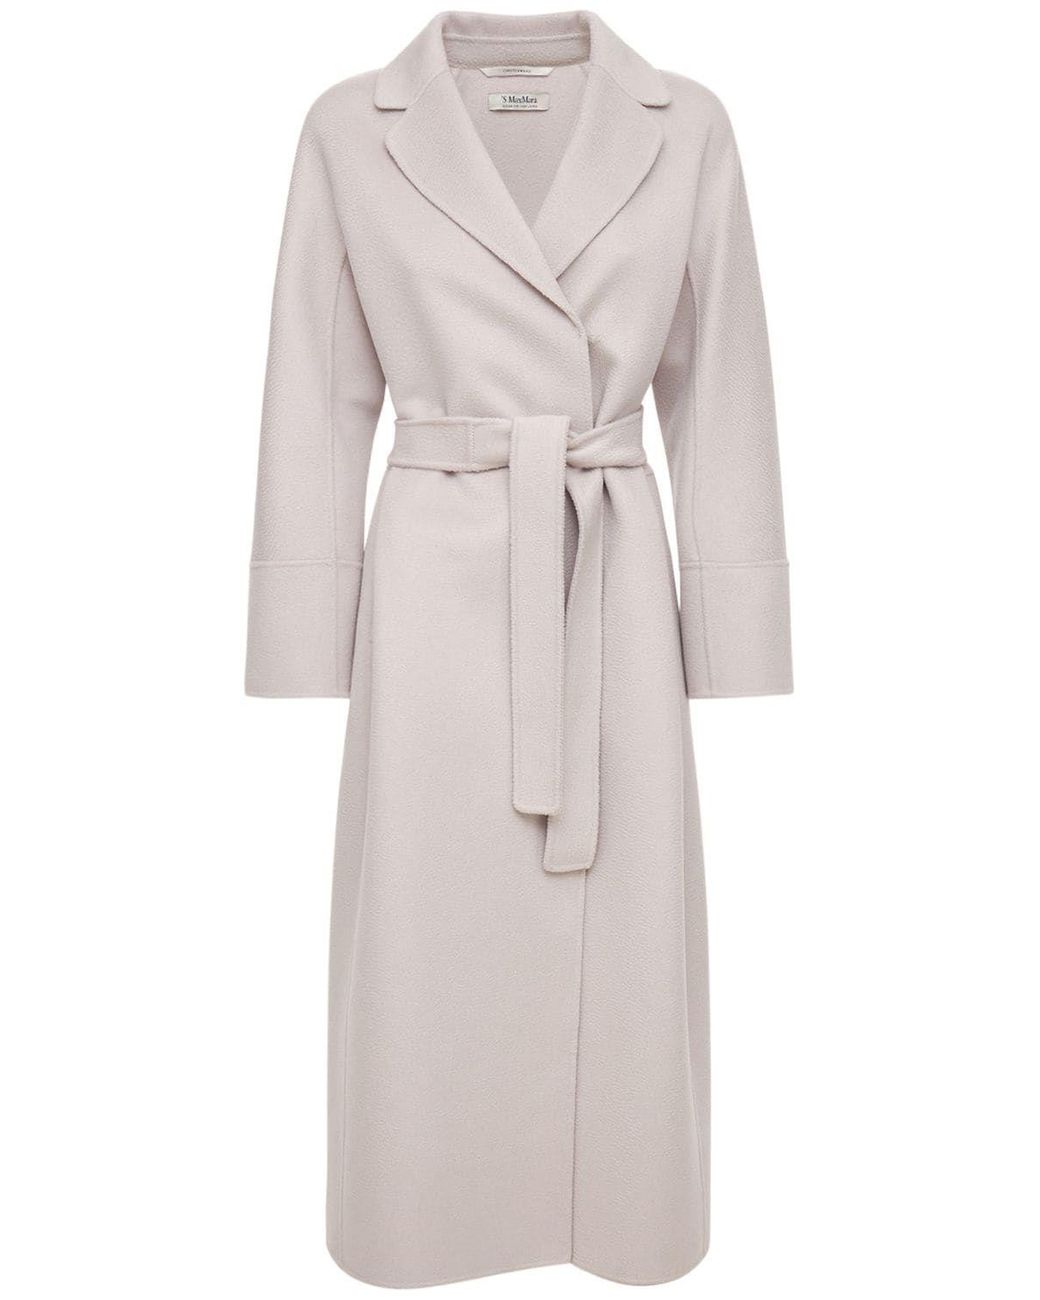 Max Mara Belted Virgin Wool & Cashmere Coat in Gray | Lyst